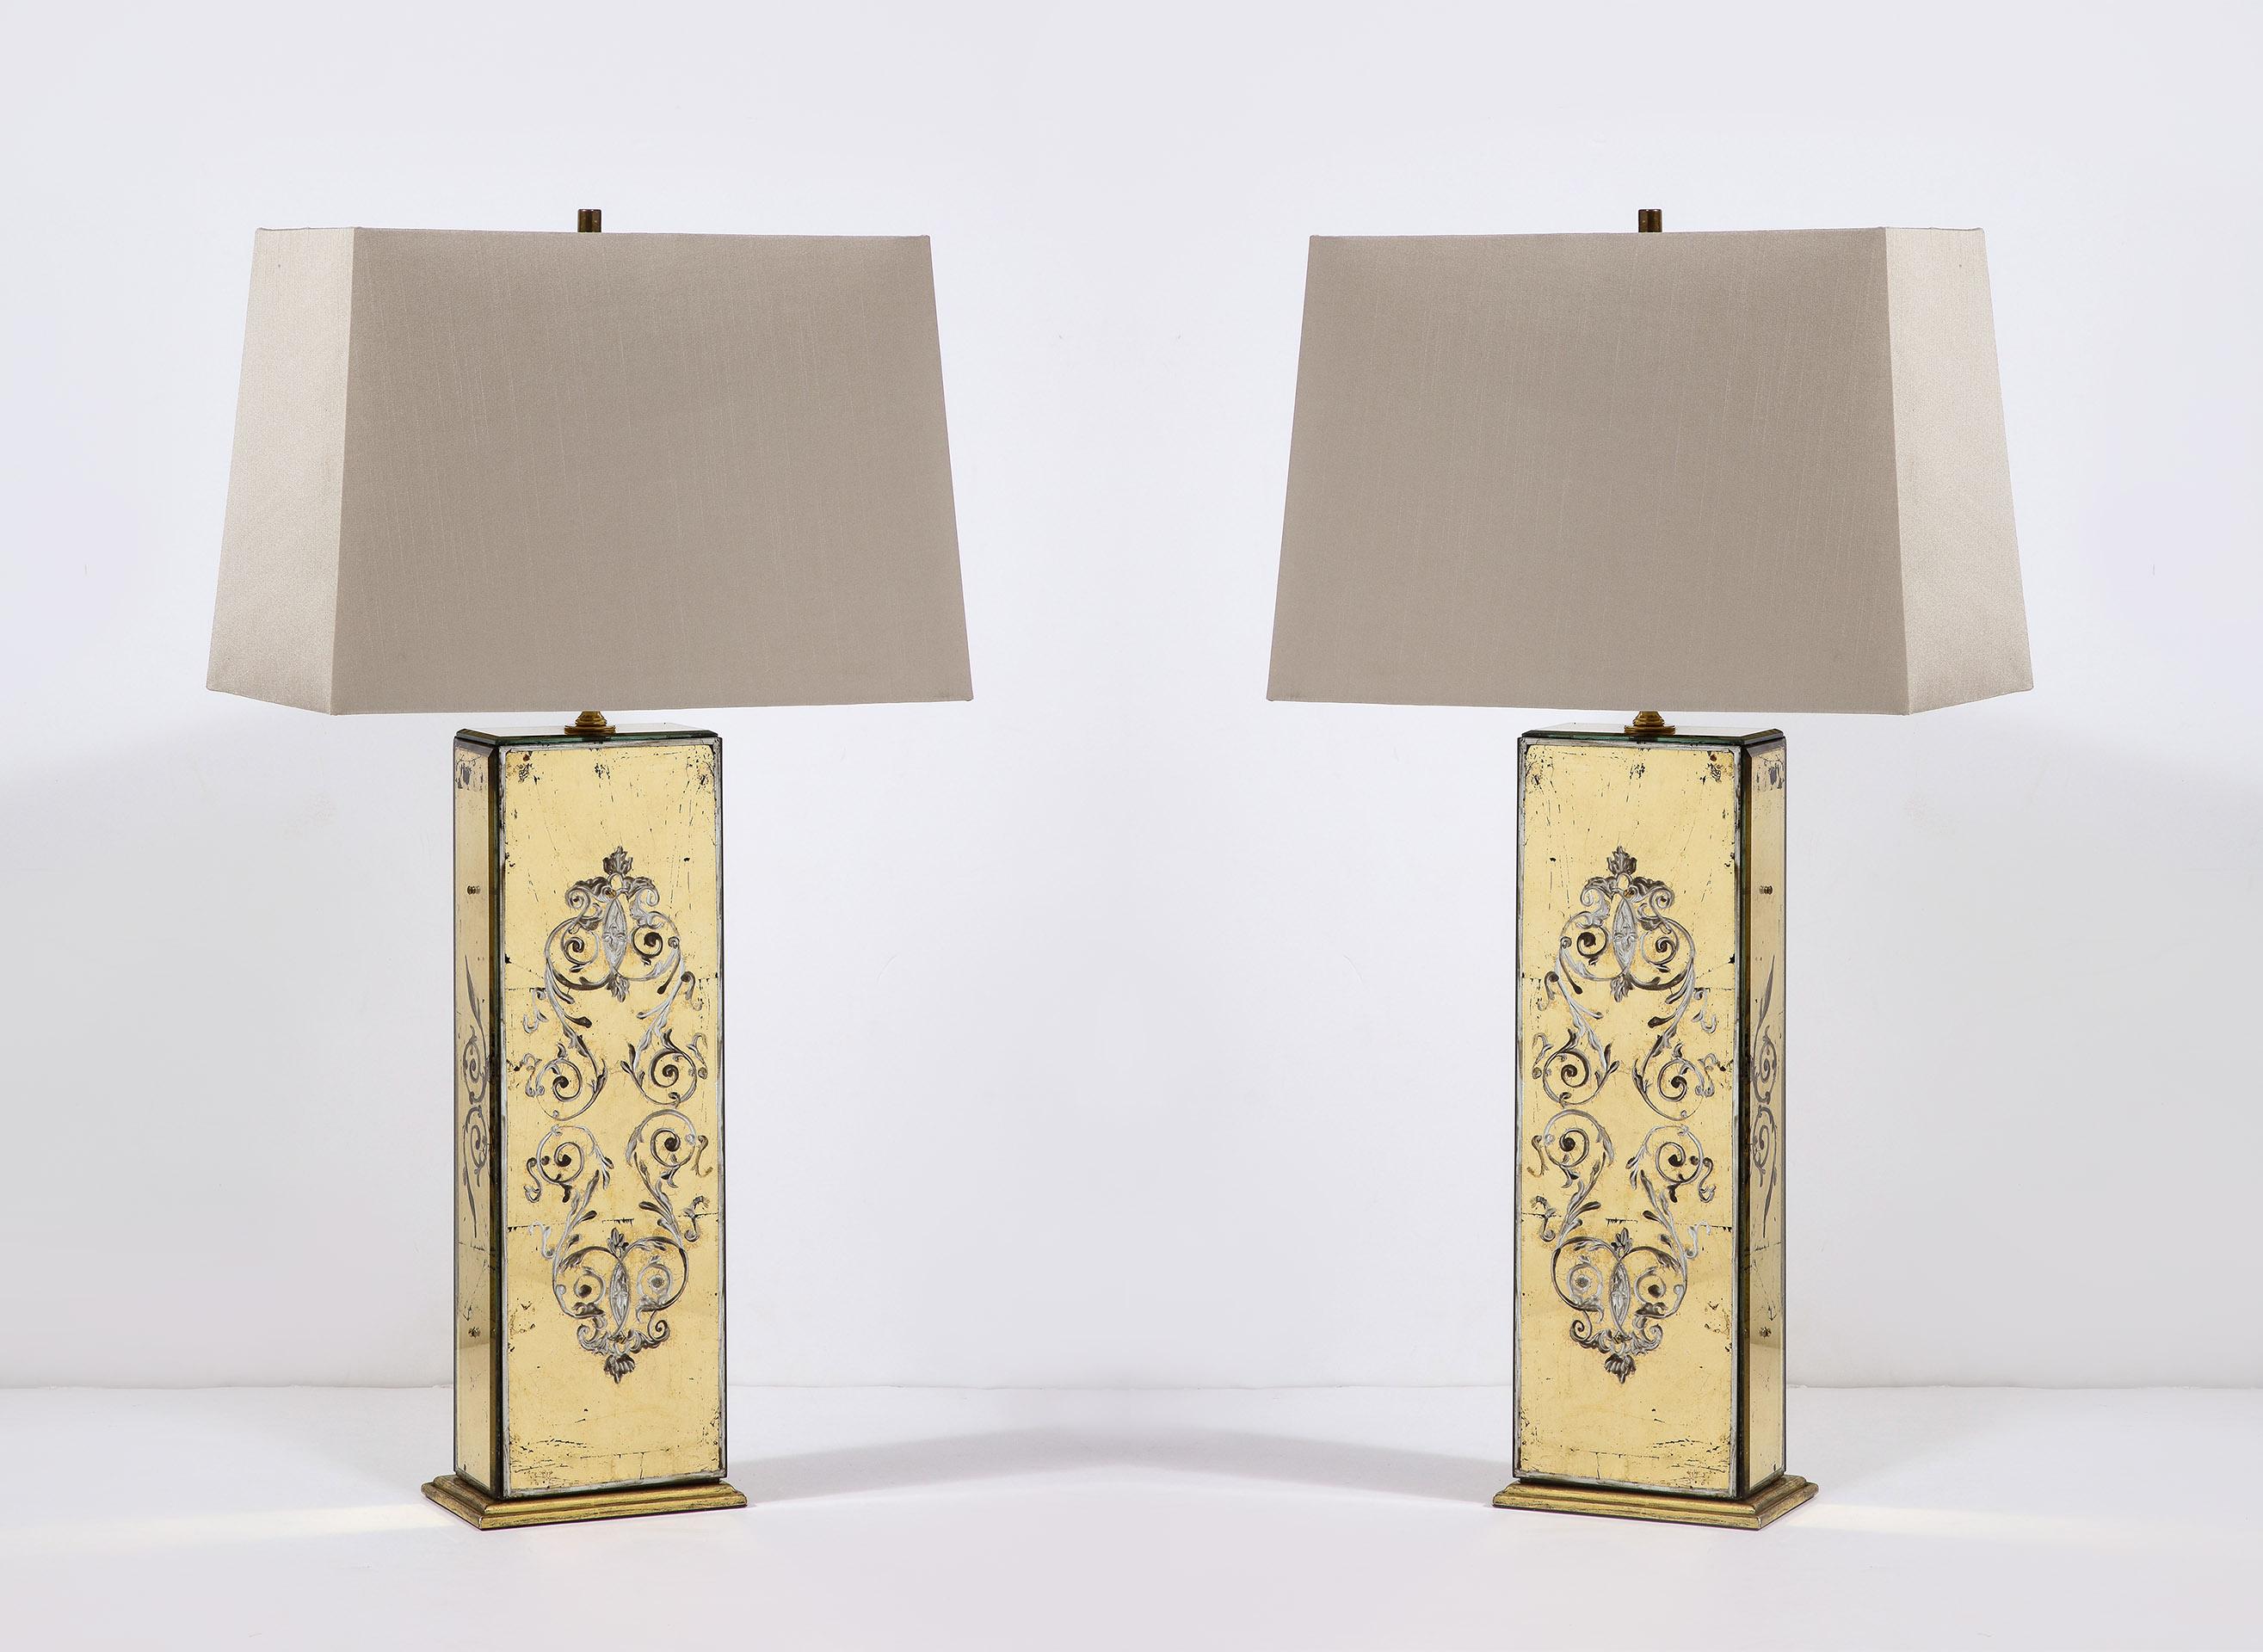 Each lamp having all four sides mirrored and decorated in a gilded and painted eglomisé surface, mounted on a gilt-wood base
(shades sold as is)